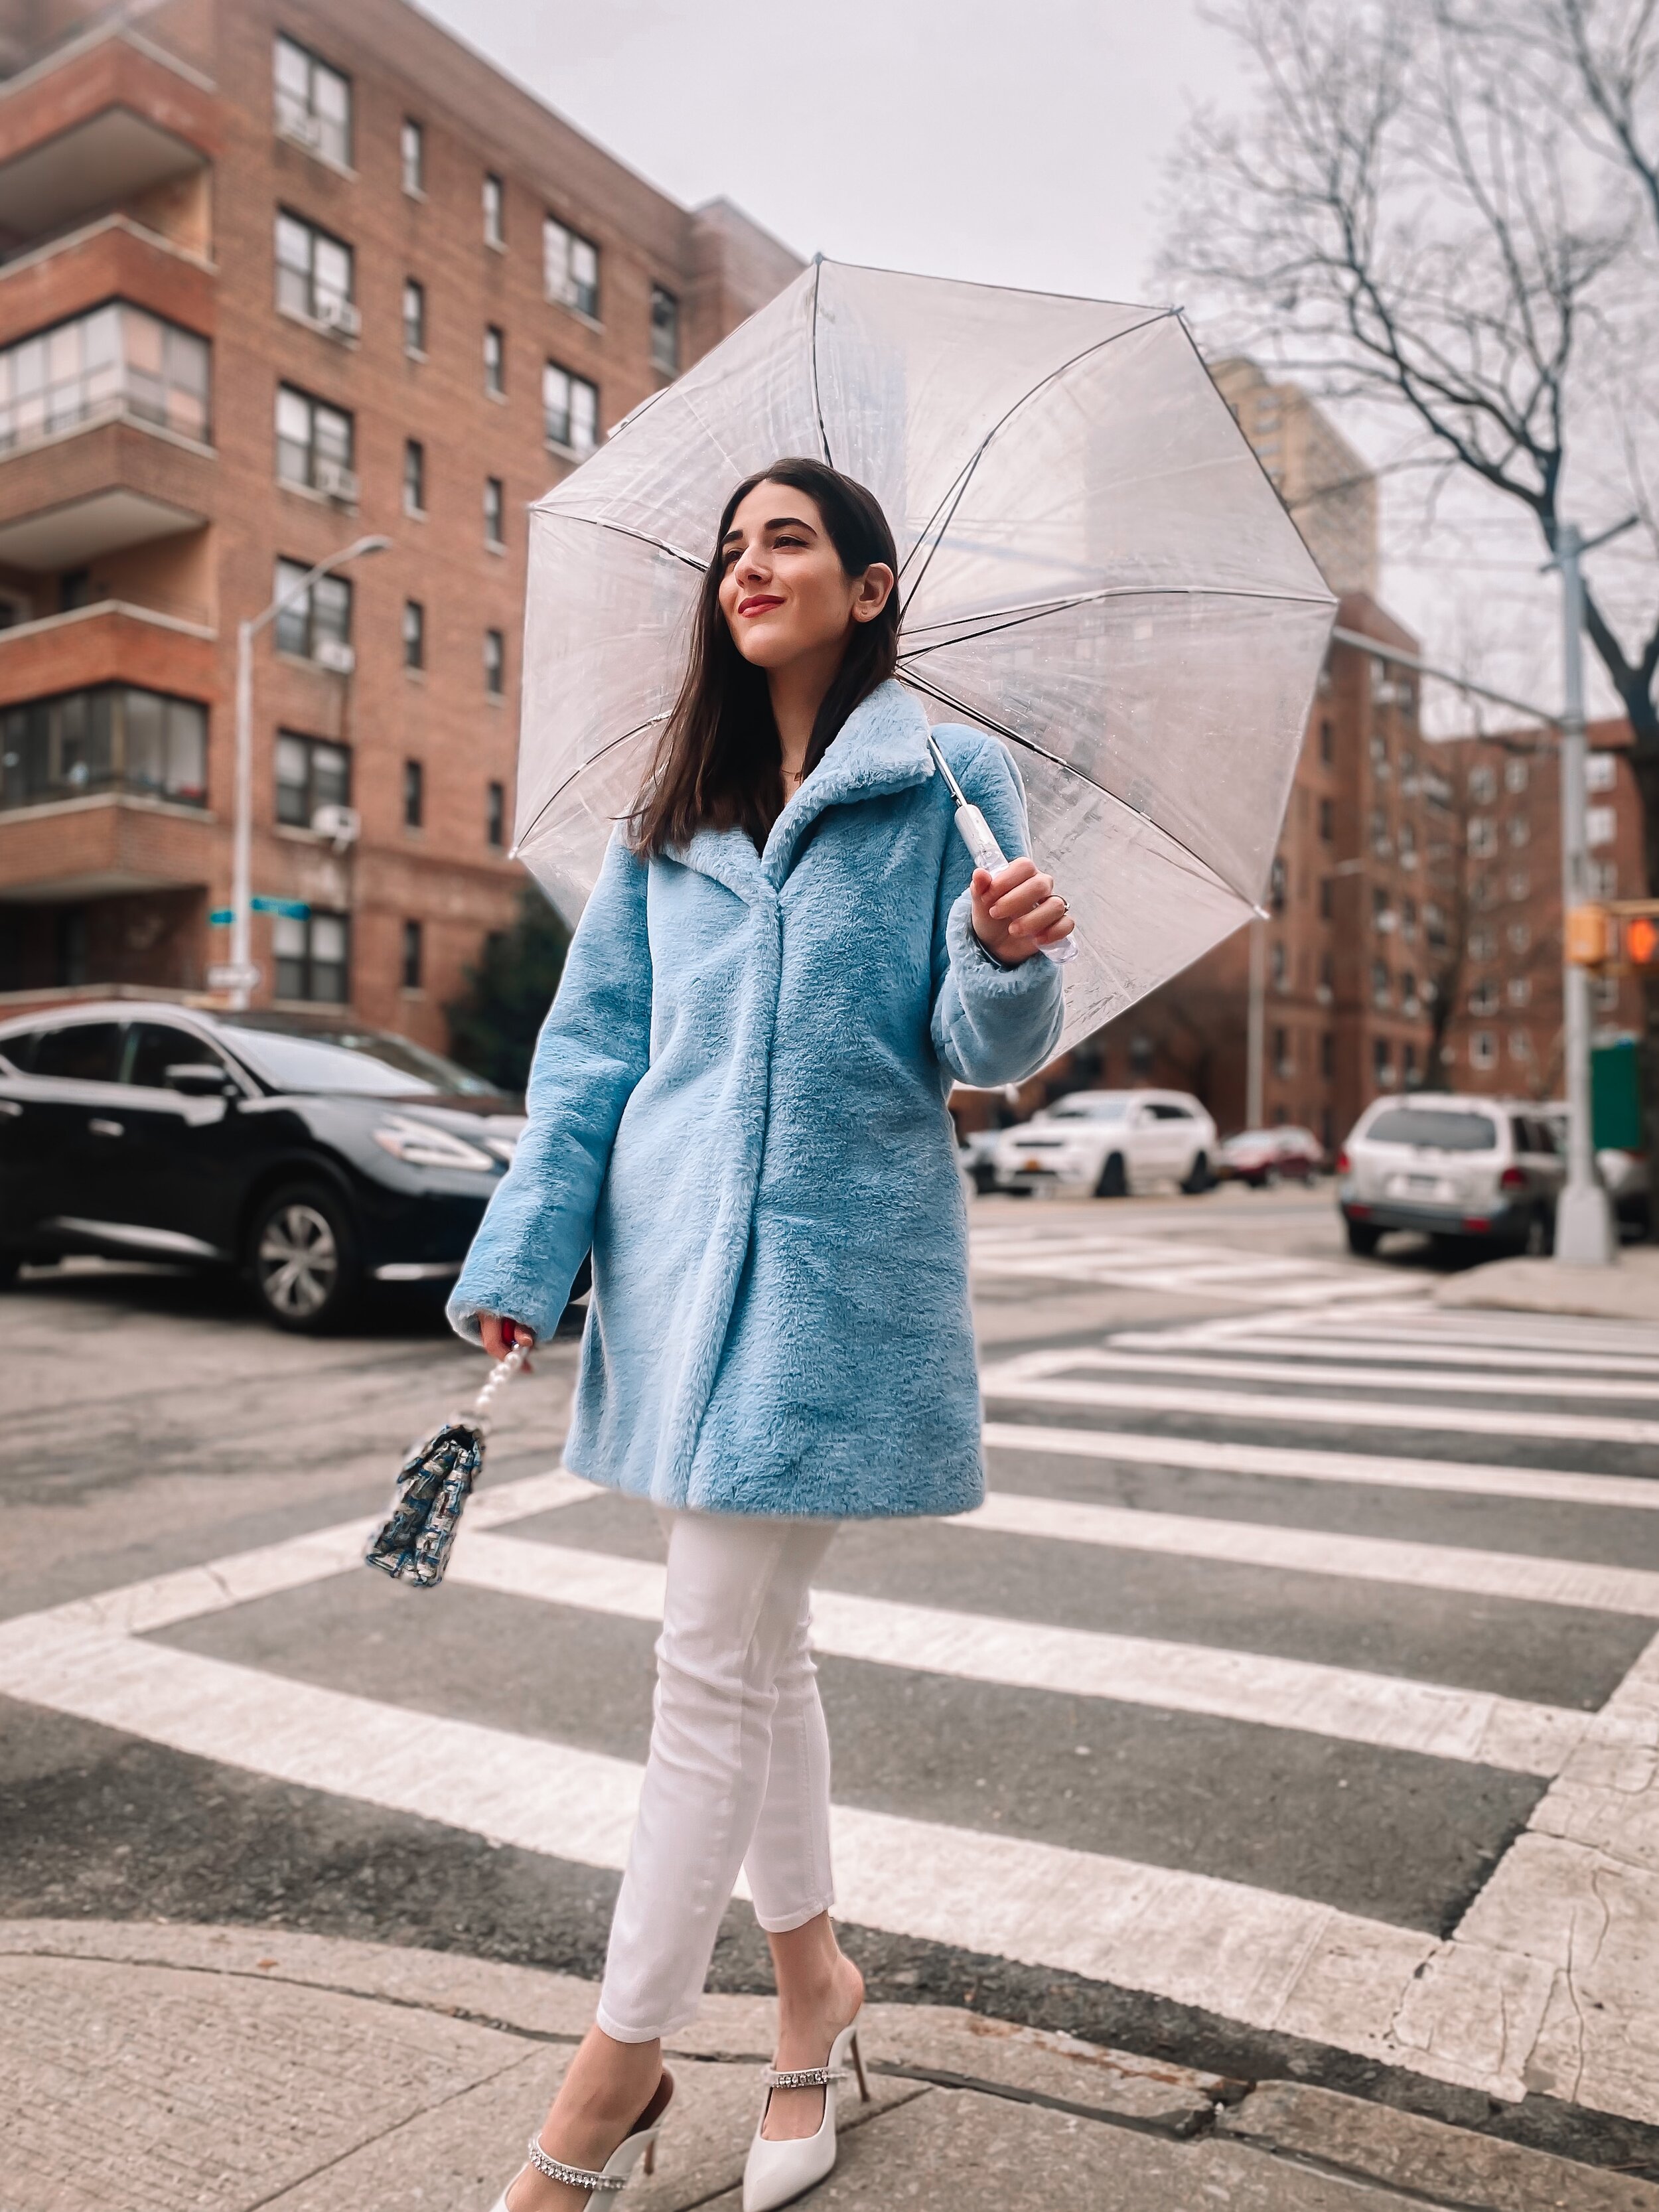 Esther Santer NYC Street Style Fashion Blogger New York City What To Wear Casual Shop Buy Girl Women Baby Blue Faux Fur Coat Calvin Klein Target Clear Dome Umbrella White Jeans 7 For All Mankind Kurt Geiger Duke White Jewel Heels Tripod Photo  Rainy.JPG